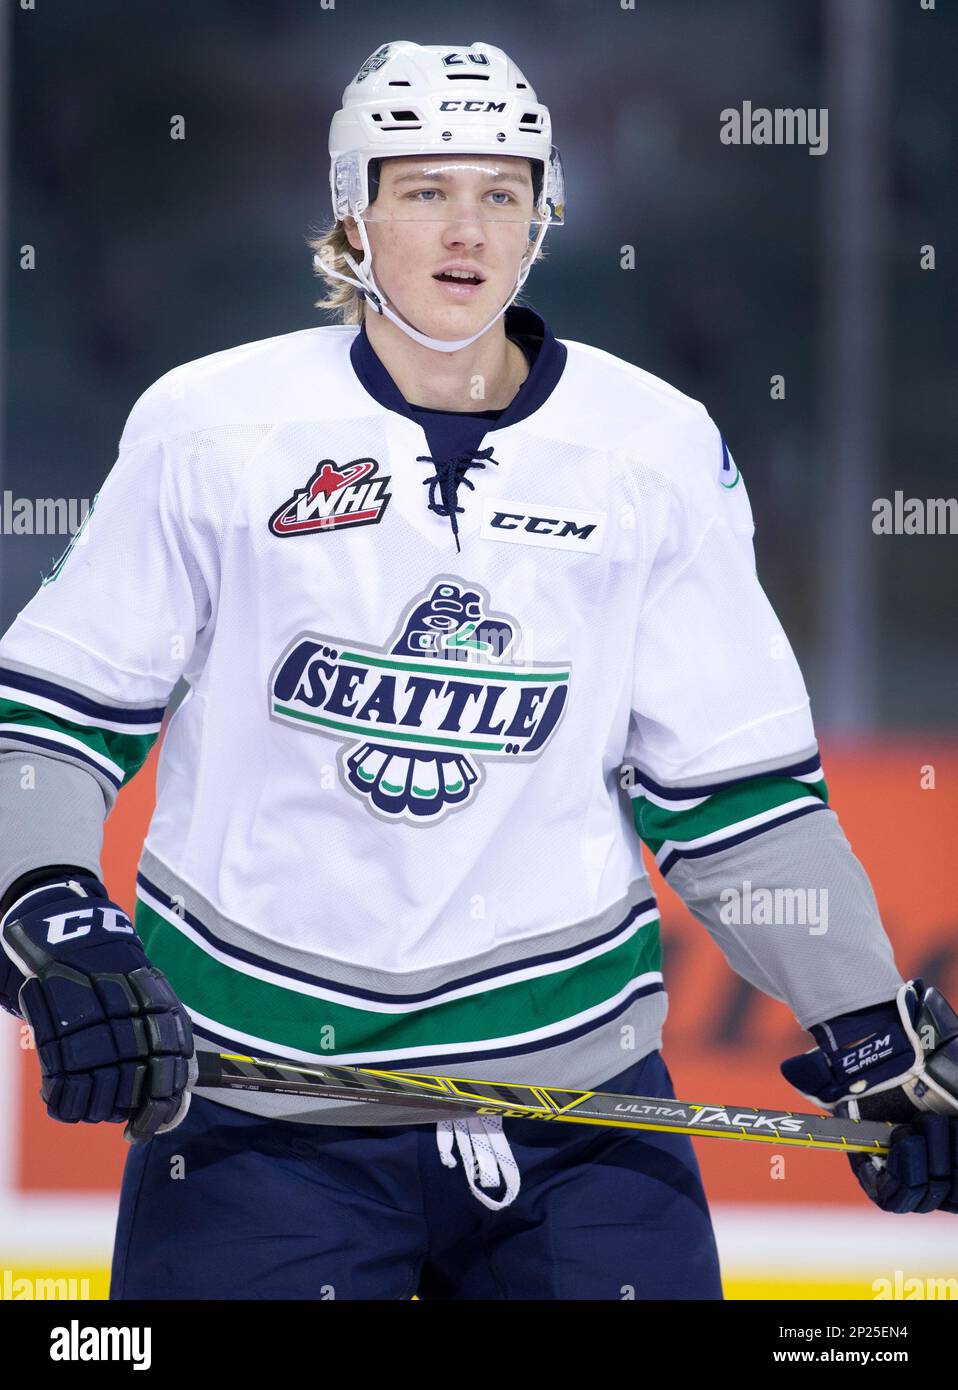 WHL (Western Hockey League) player profile photo on Seattle Thunderbirds Gustav Olhaver, from Sweden, during a WHL hockey game against the Calgary Hitmen in Calgary, Alberta on Nov